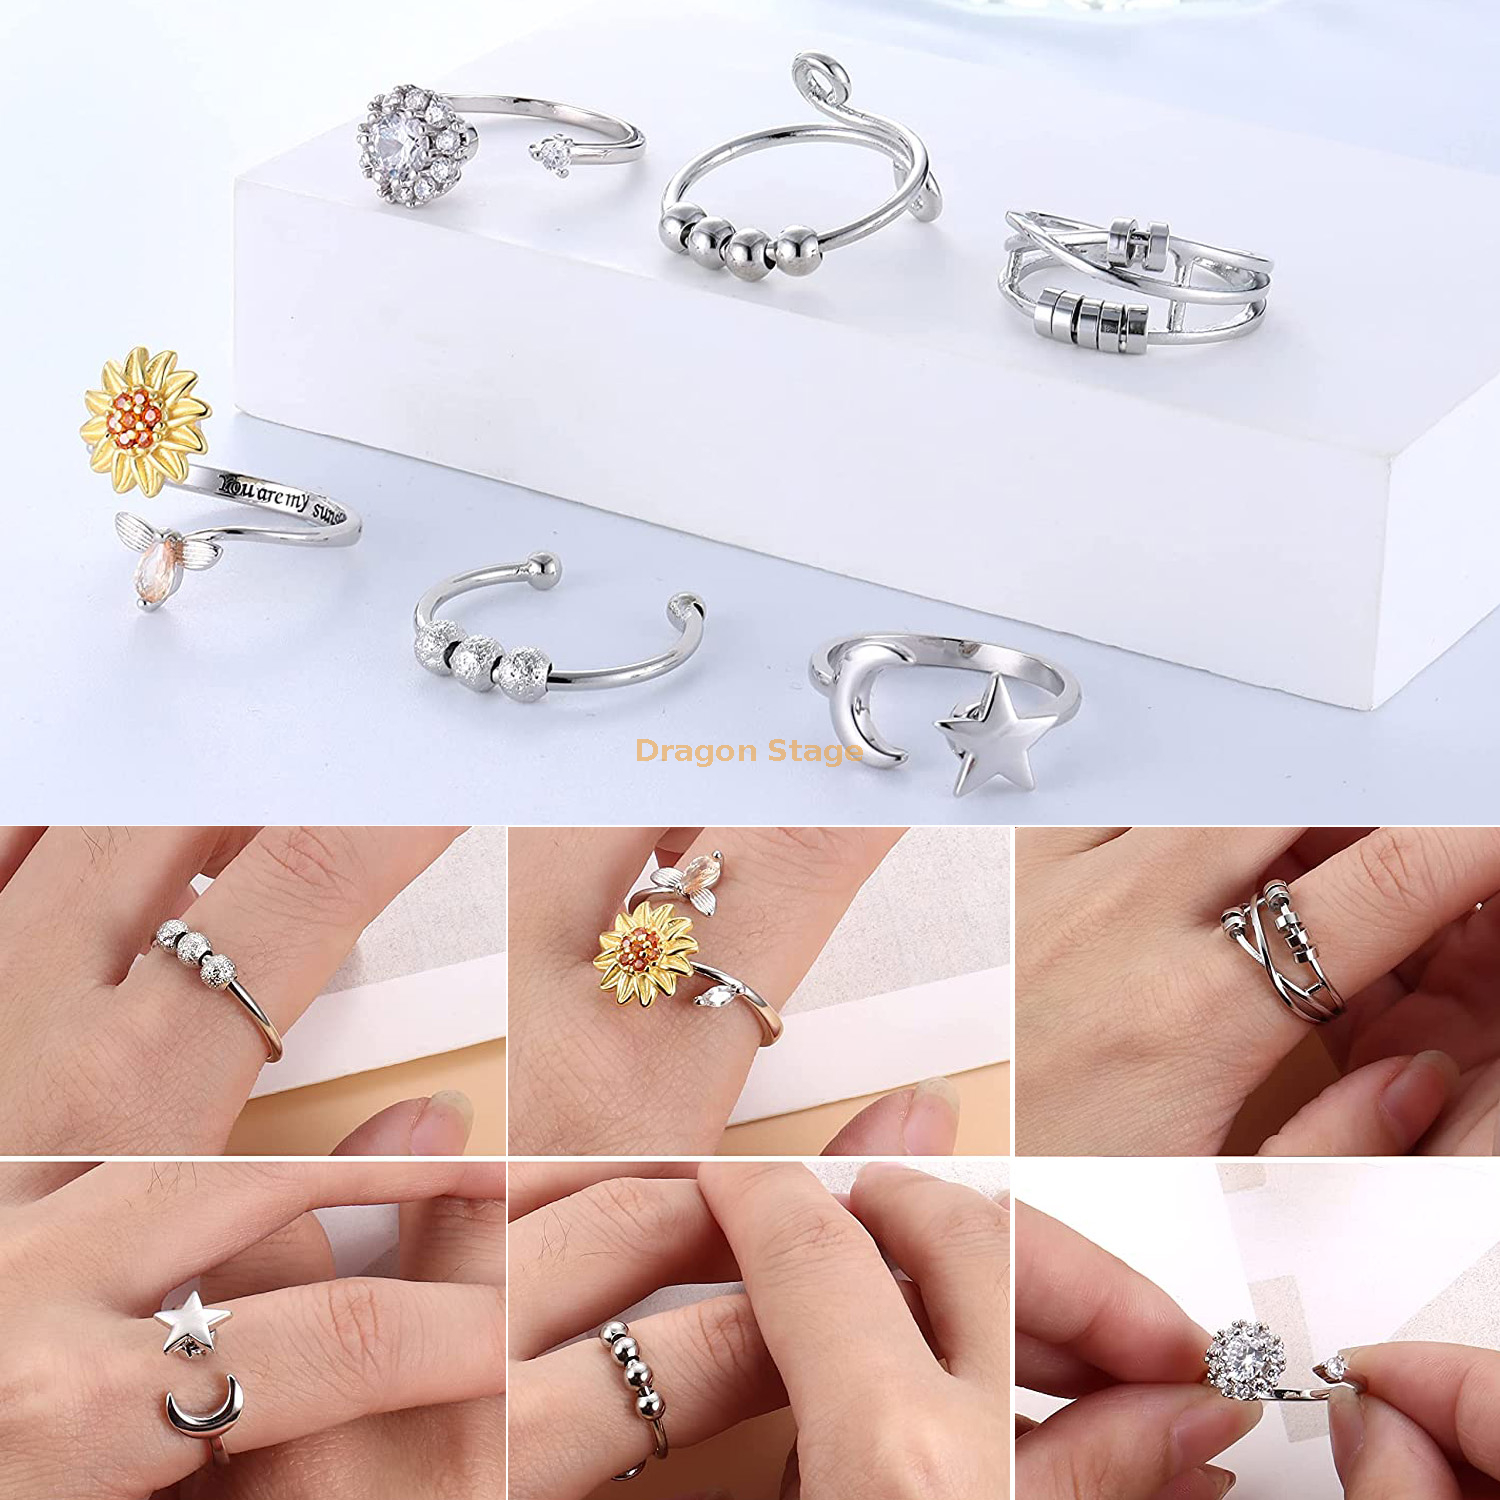 How to choose a event ring according to finger shape?